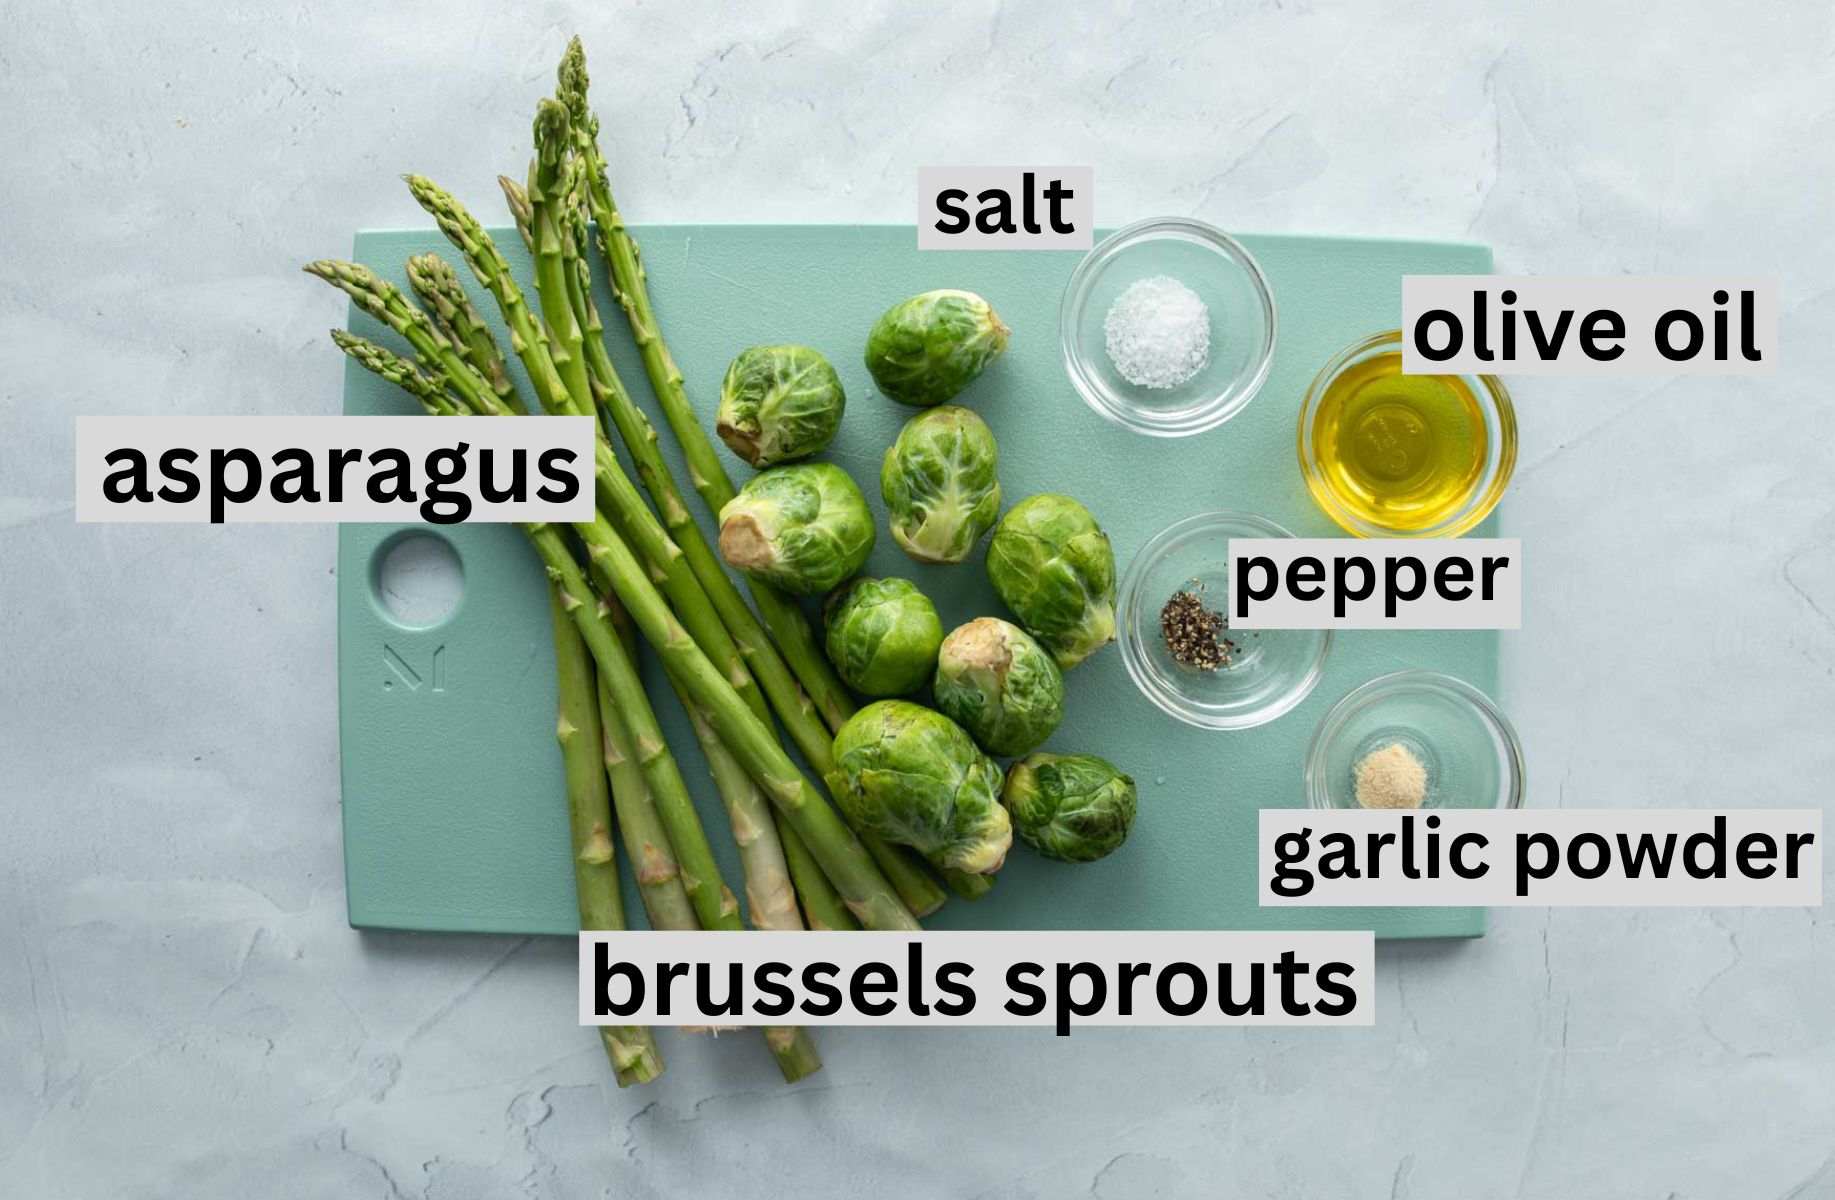 asparagus, brussels sprouts, seasonings and oil on cutting board, with labels